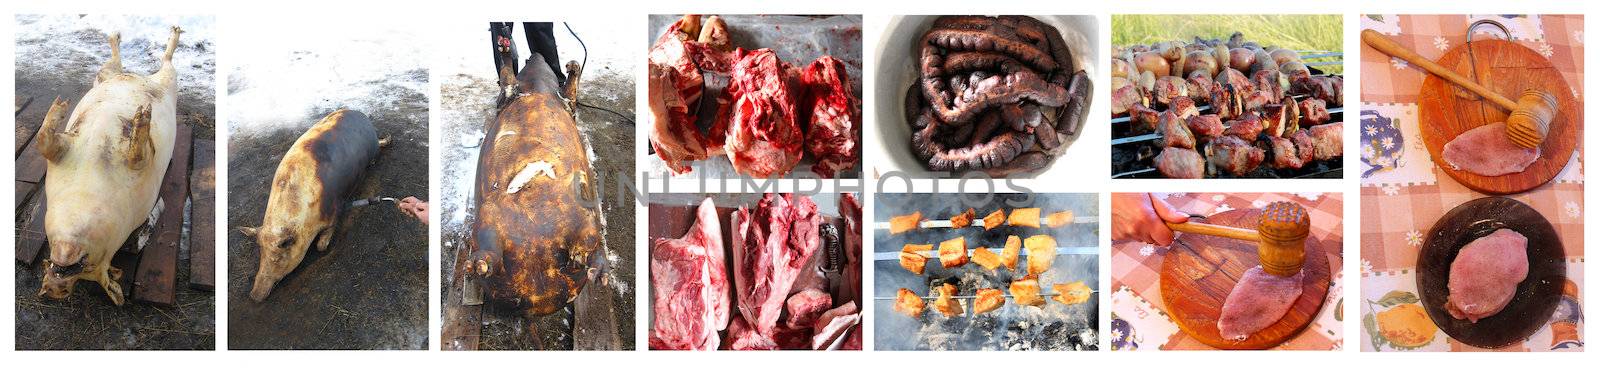 process whith passes meat from the slaughter to fresh dish by alexmak